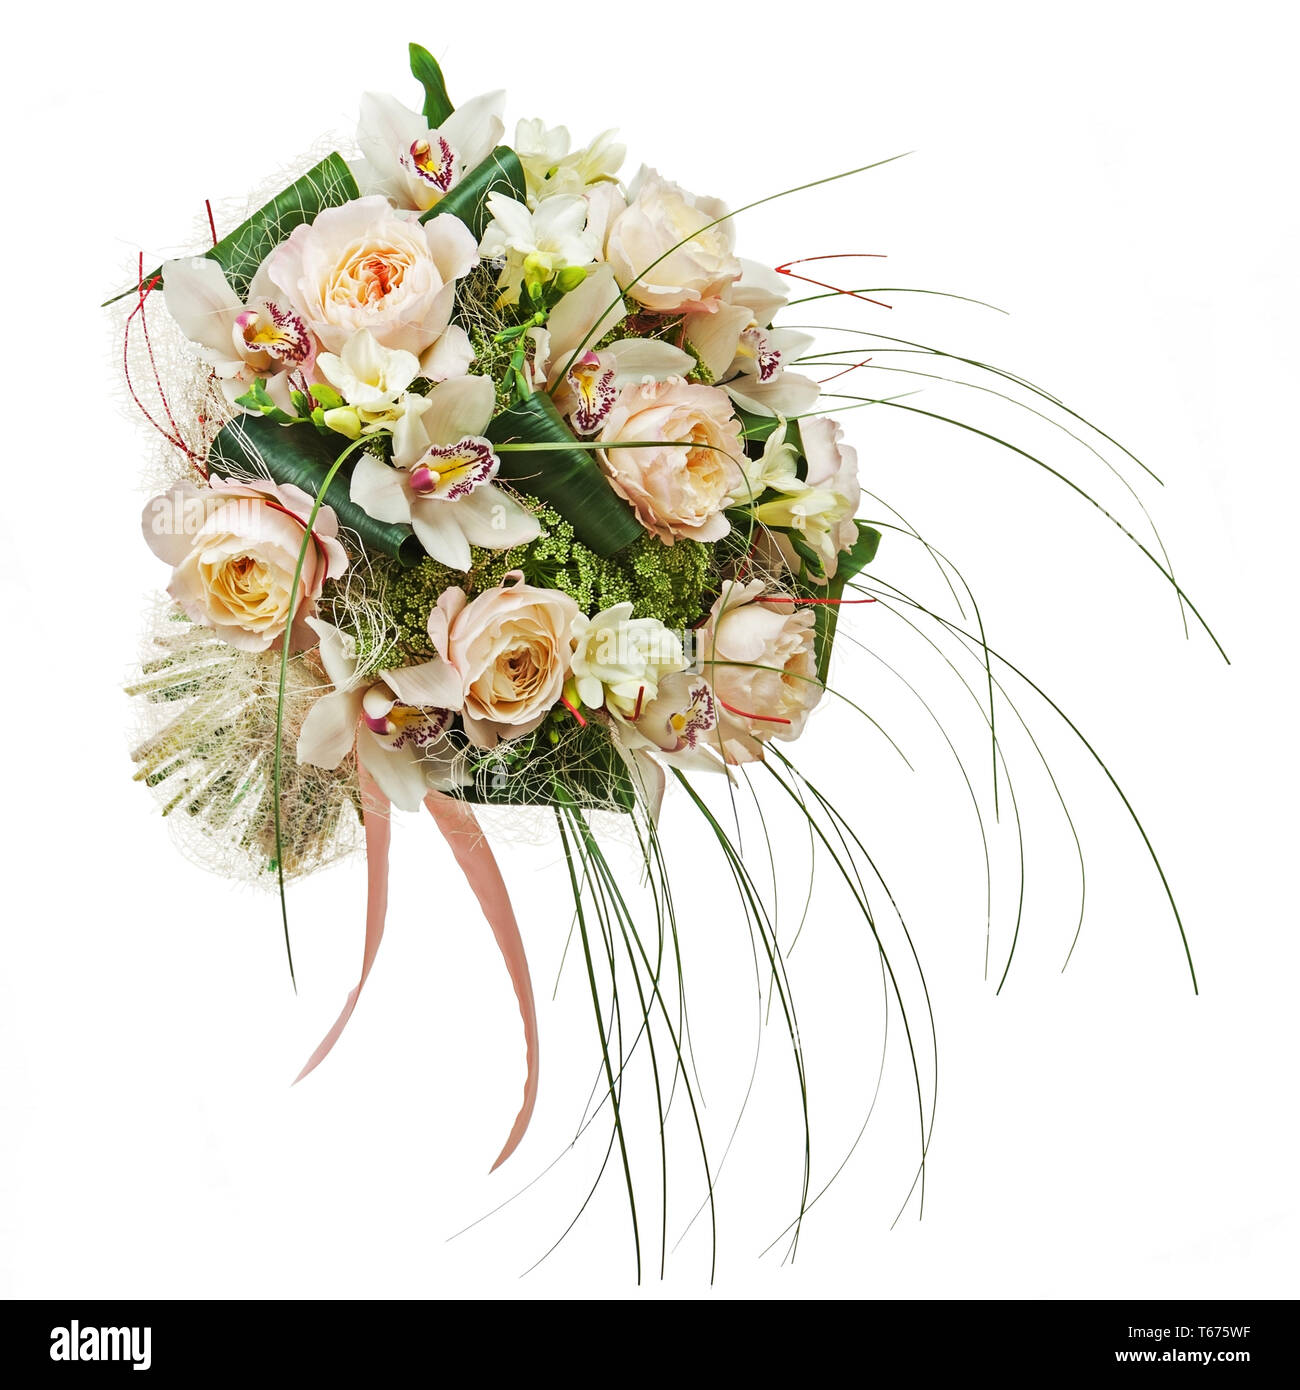 Flower arrangement of peon flowers and orchids iso Stock Photo